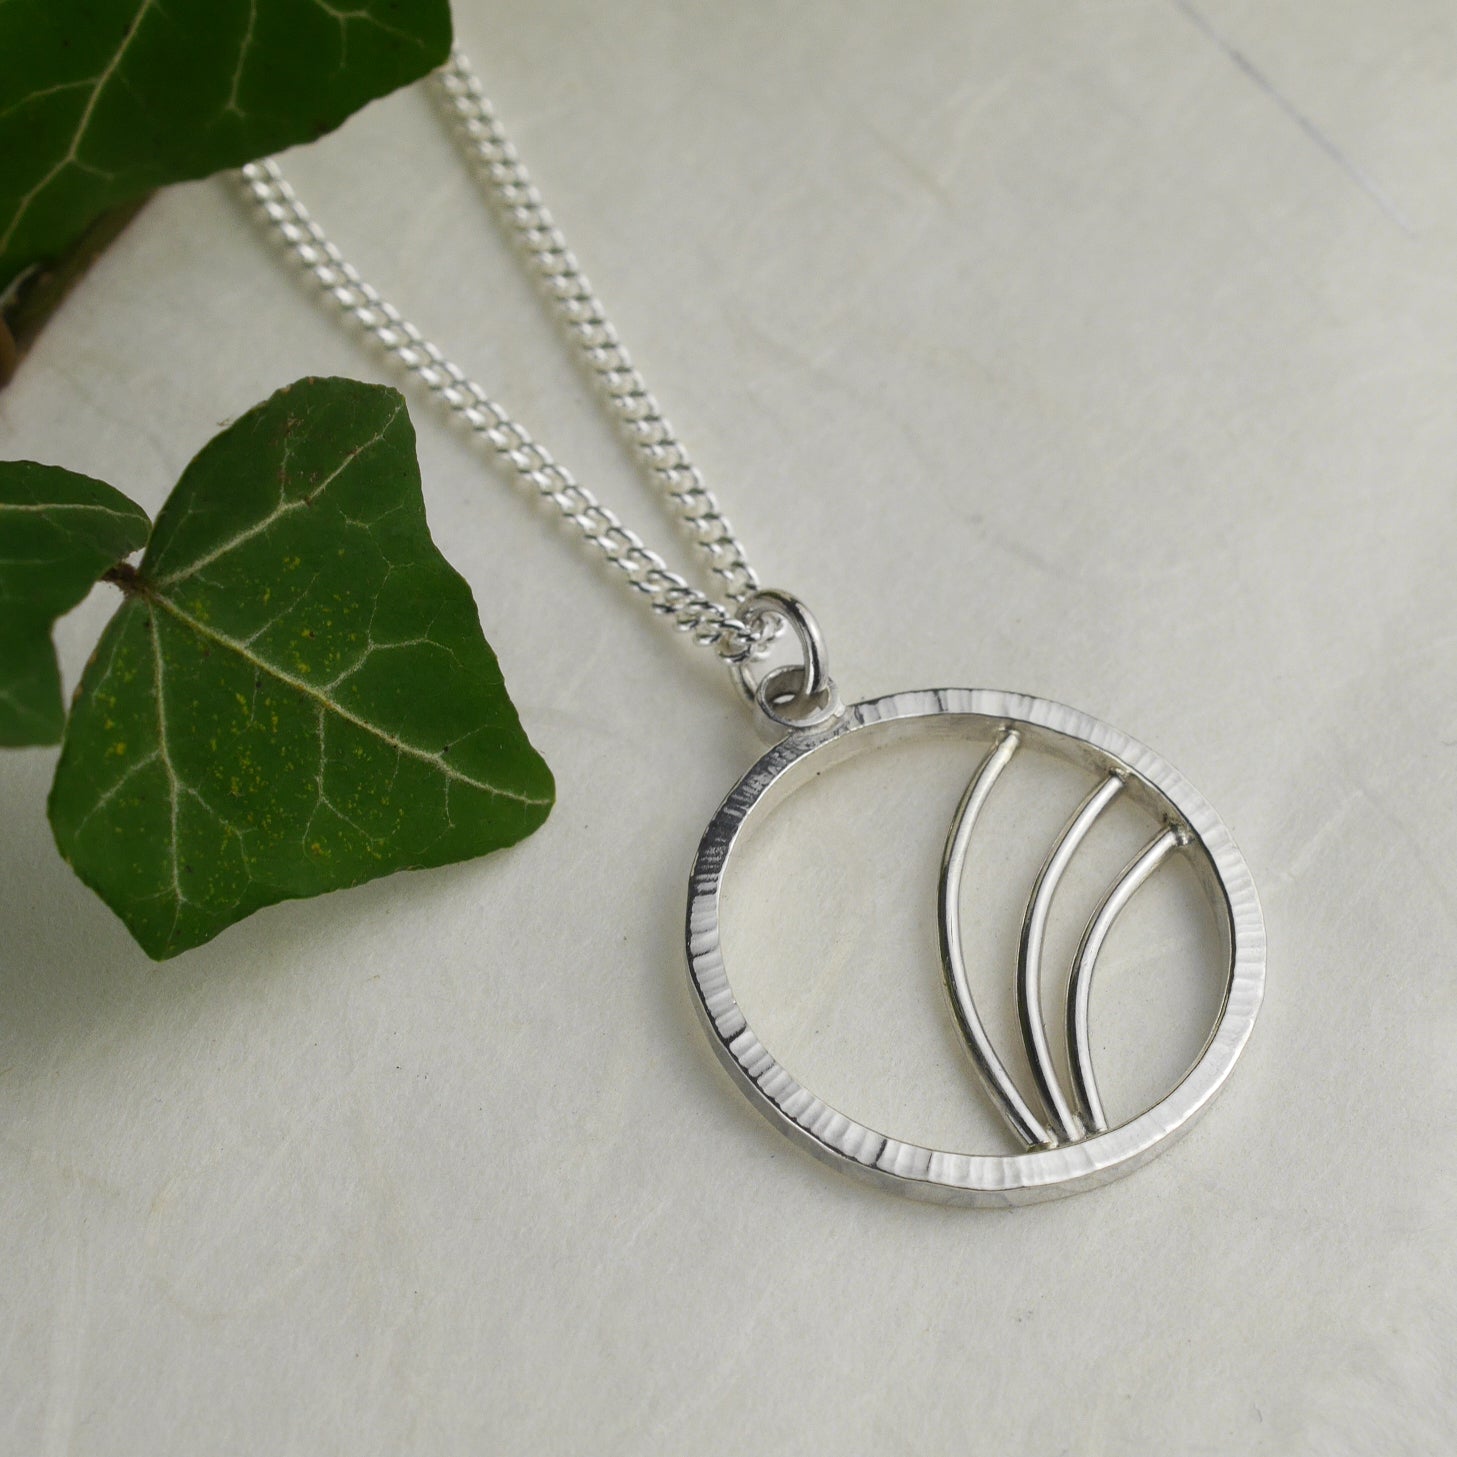 Hammered Silver Circle Necklace with Arc Details